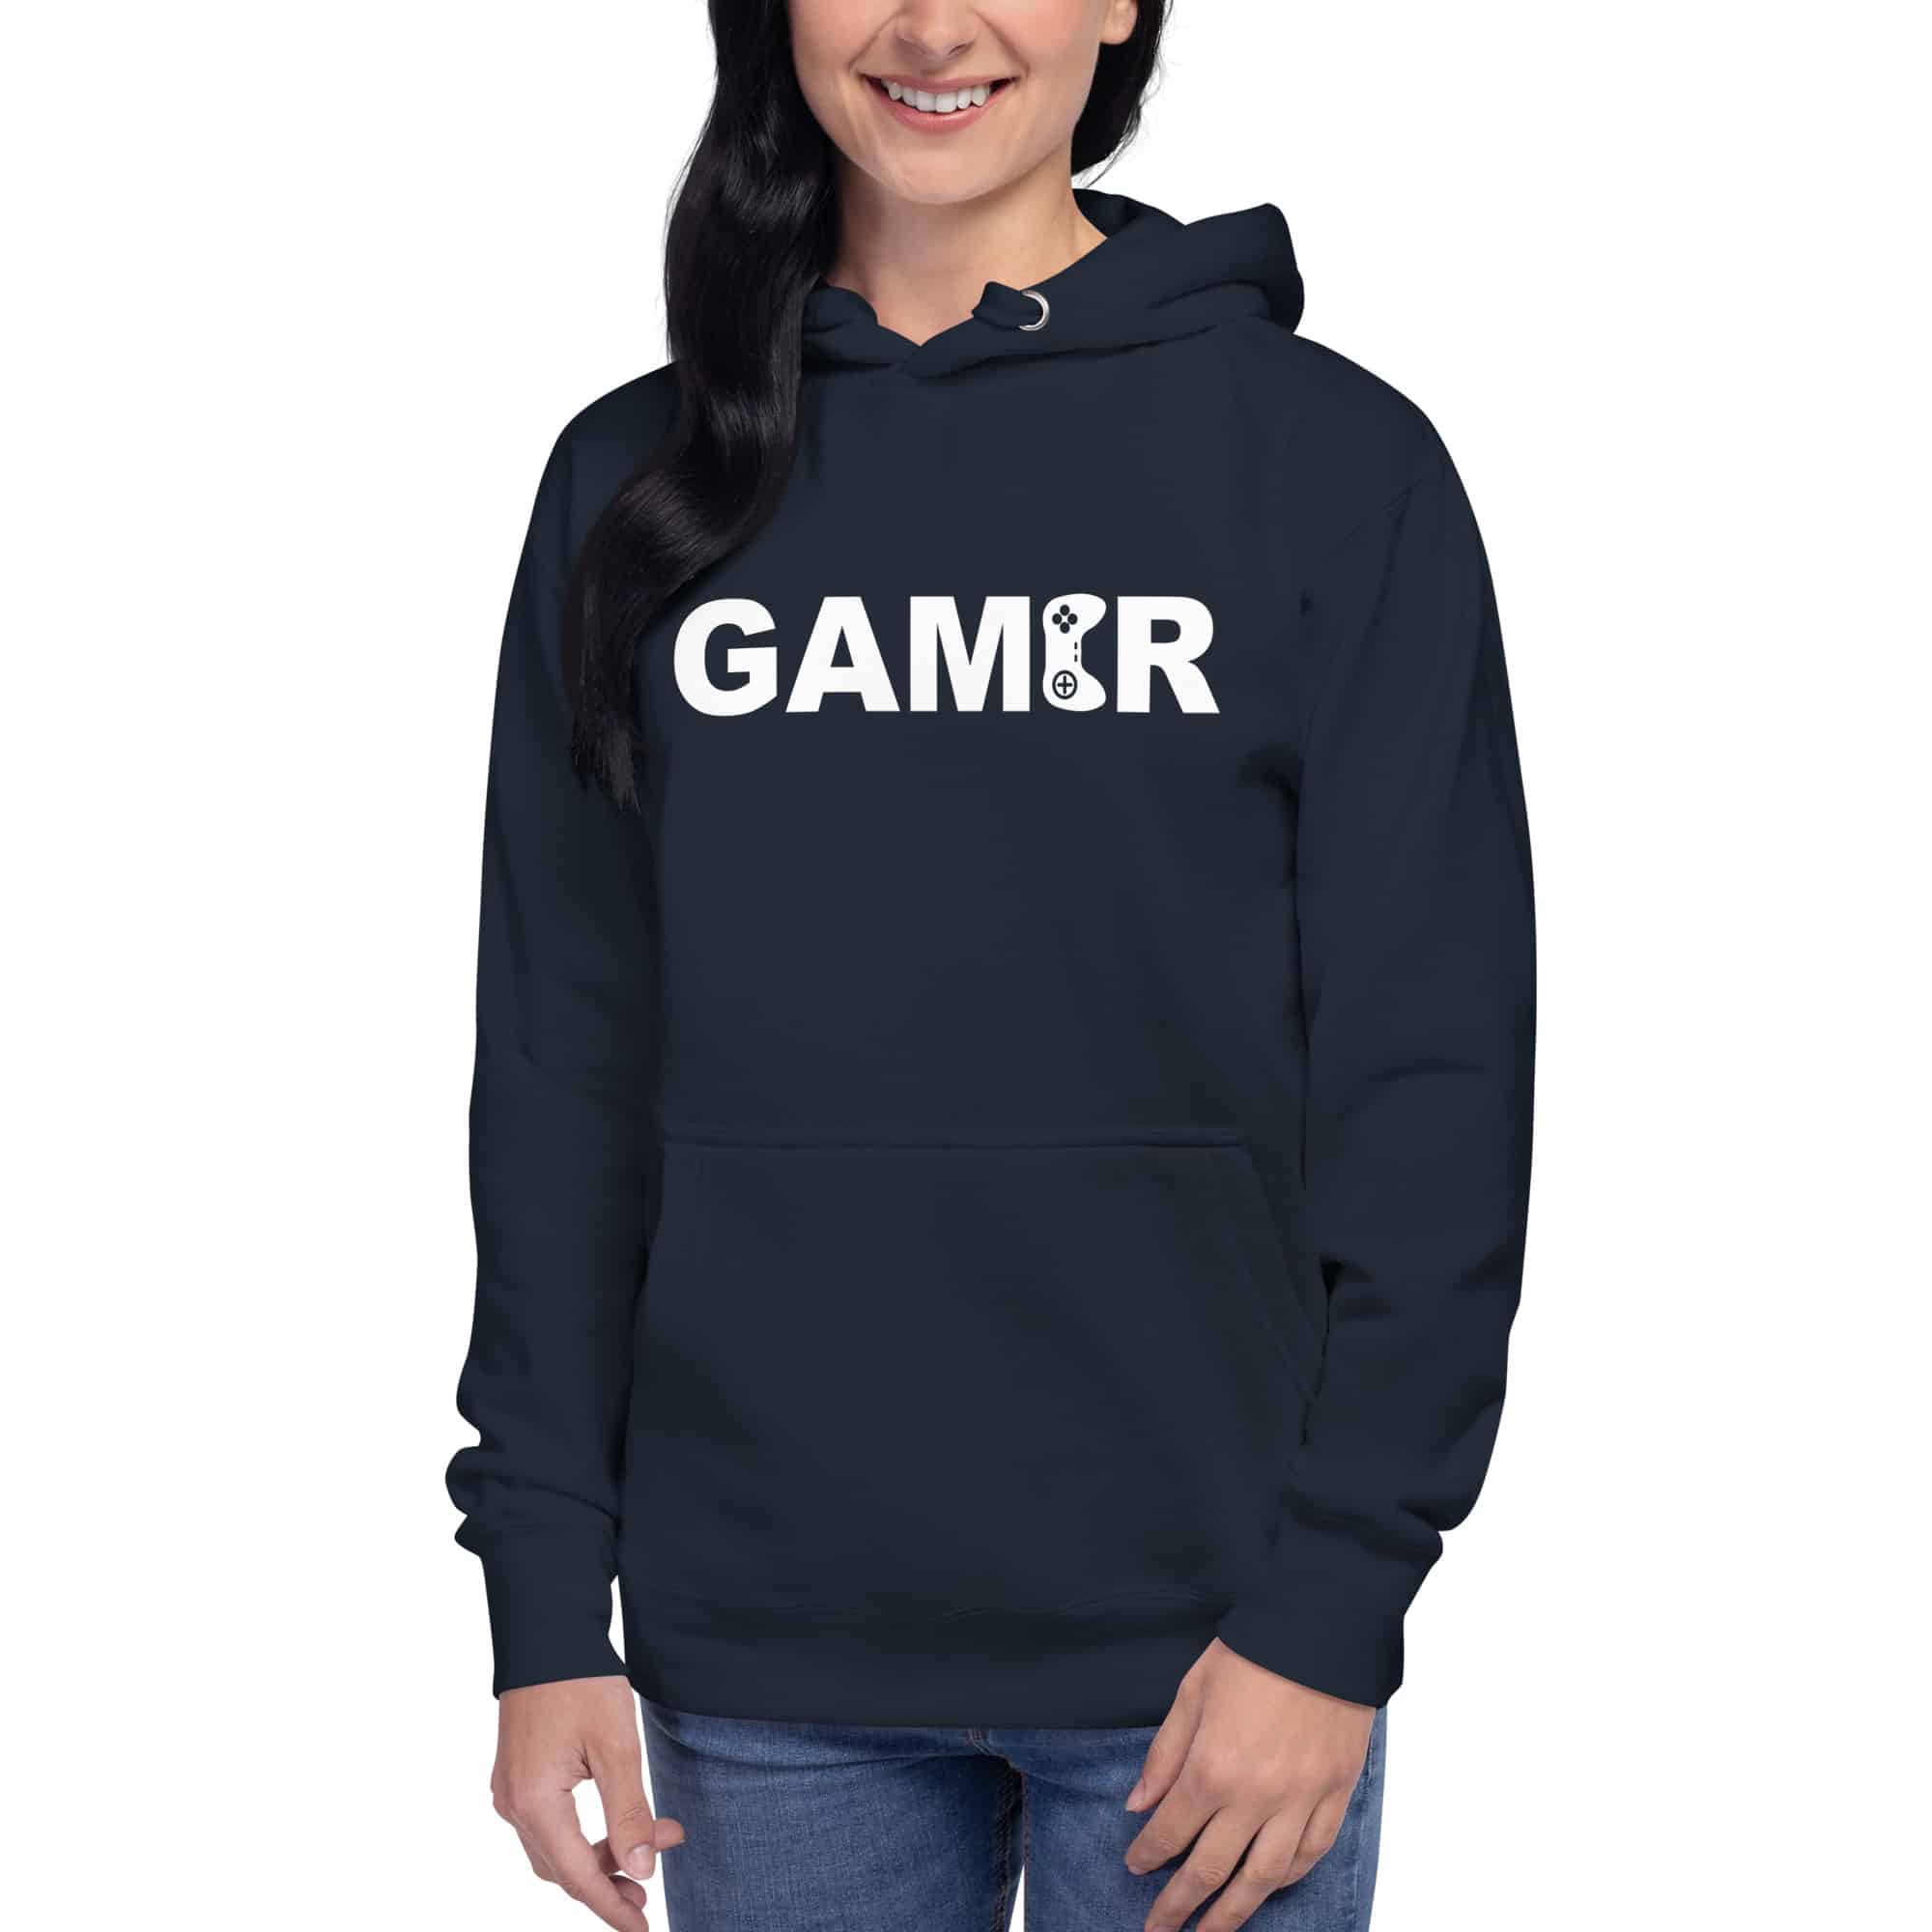 Gamer Unisex Hoodie Women's graphic t-shirts Women's designer shirts Men's graphic t-shirts Men's designer shirts Premium sweatshirts Unisex hoodies Premium hooded sweatshirts Designer sweatshirts High-quality sweatshirts Luxury sweatshirts Unisex fleece sweatshirts Premium pullover sweatshirts Unisex heavyweight sweatshirts Premium cotton sweatshirts Video game store Gaming merchandise Gaming accessories shop Online gaming store Video game shop near me Gaming console store PC gaming store Gaming gear shop Retro gaming shop Board game shop Anime merchandise Anime store online Japanese anime shop Anime figurines Manga shop Anime DVDs Anime accessories Anime apparel Anime collectibles Anime gifts